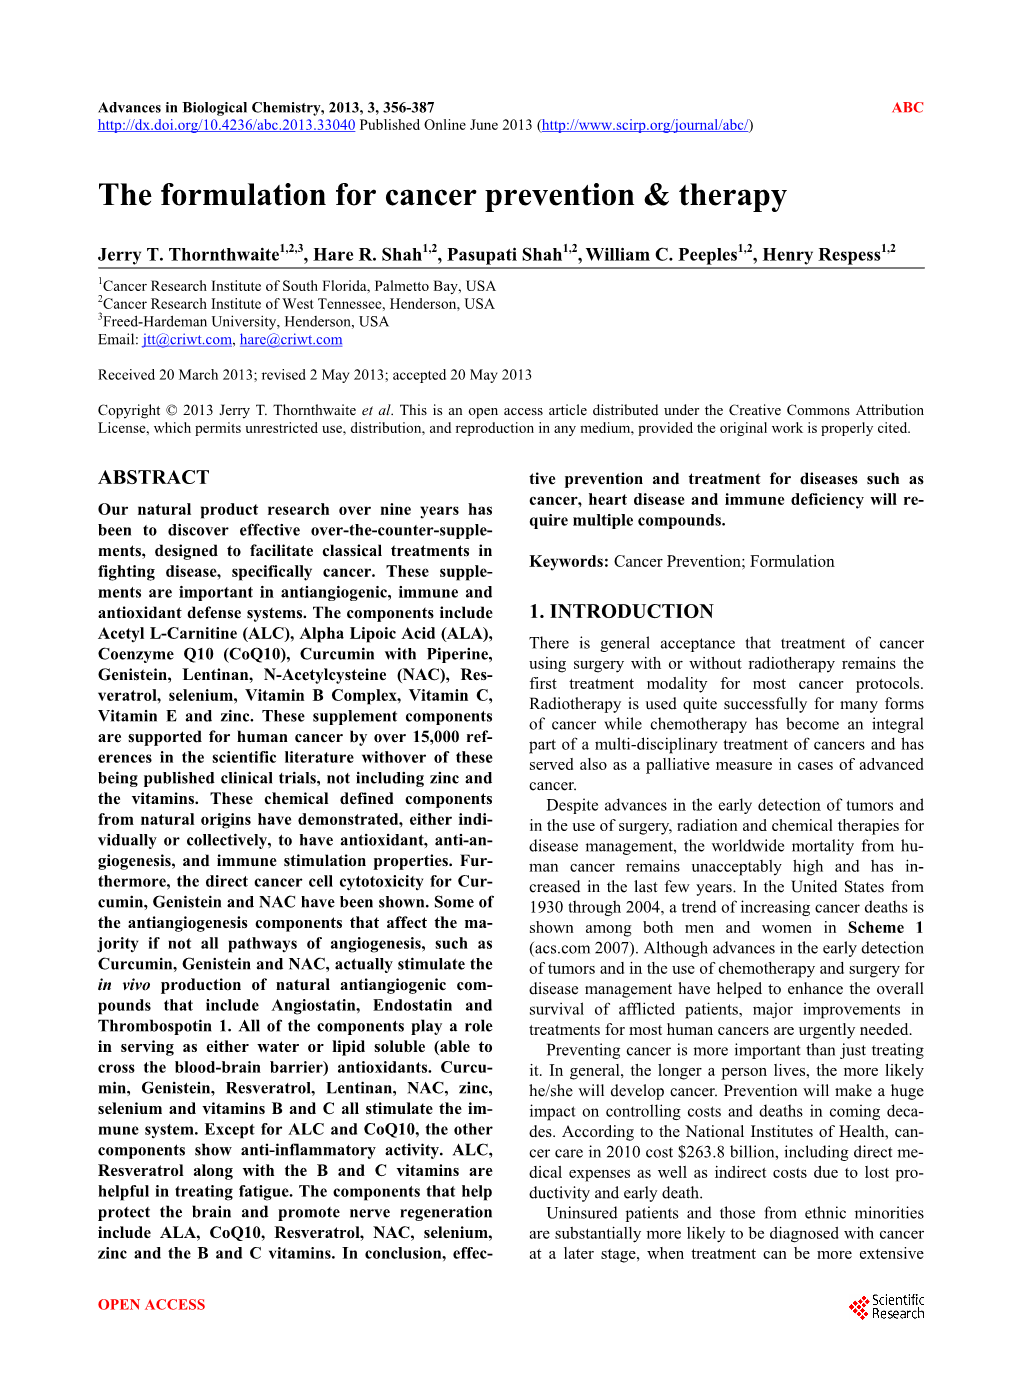 The Formulation for Cancer Prevention & Therapy